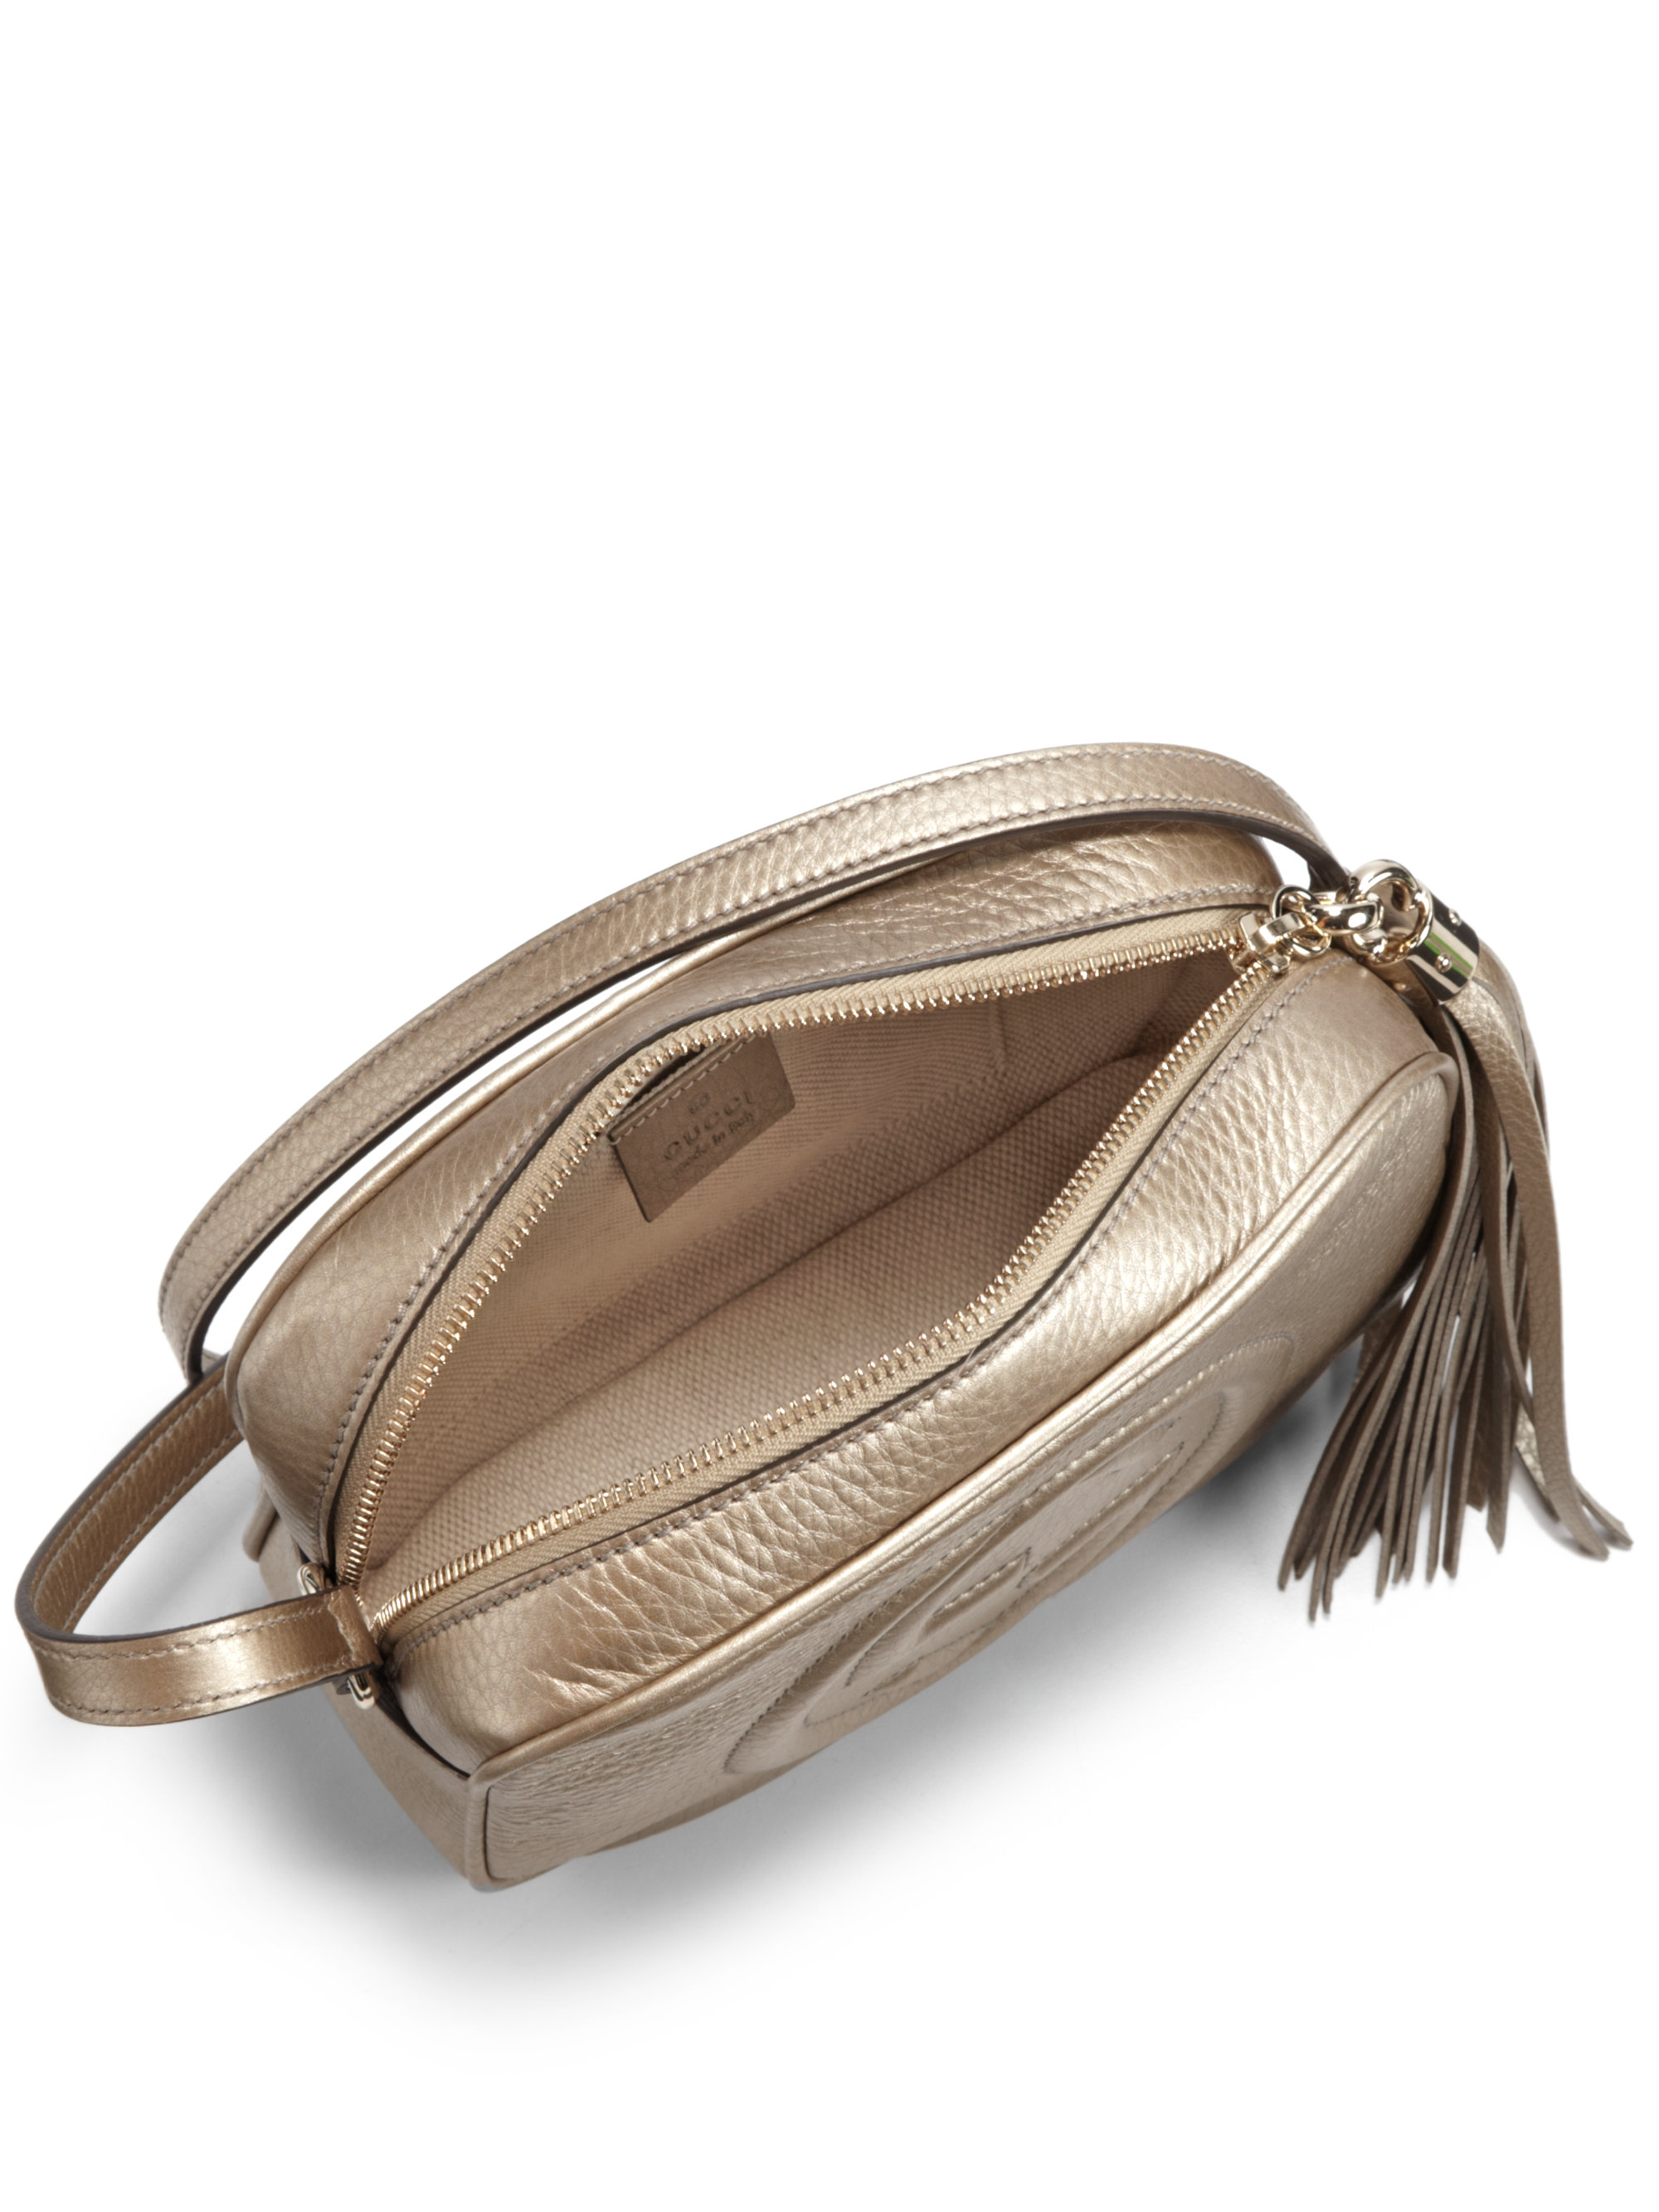 Gucci Soho Metallic Leather Disco Bag in Champagne (Natural) - Lyst